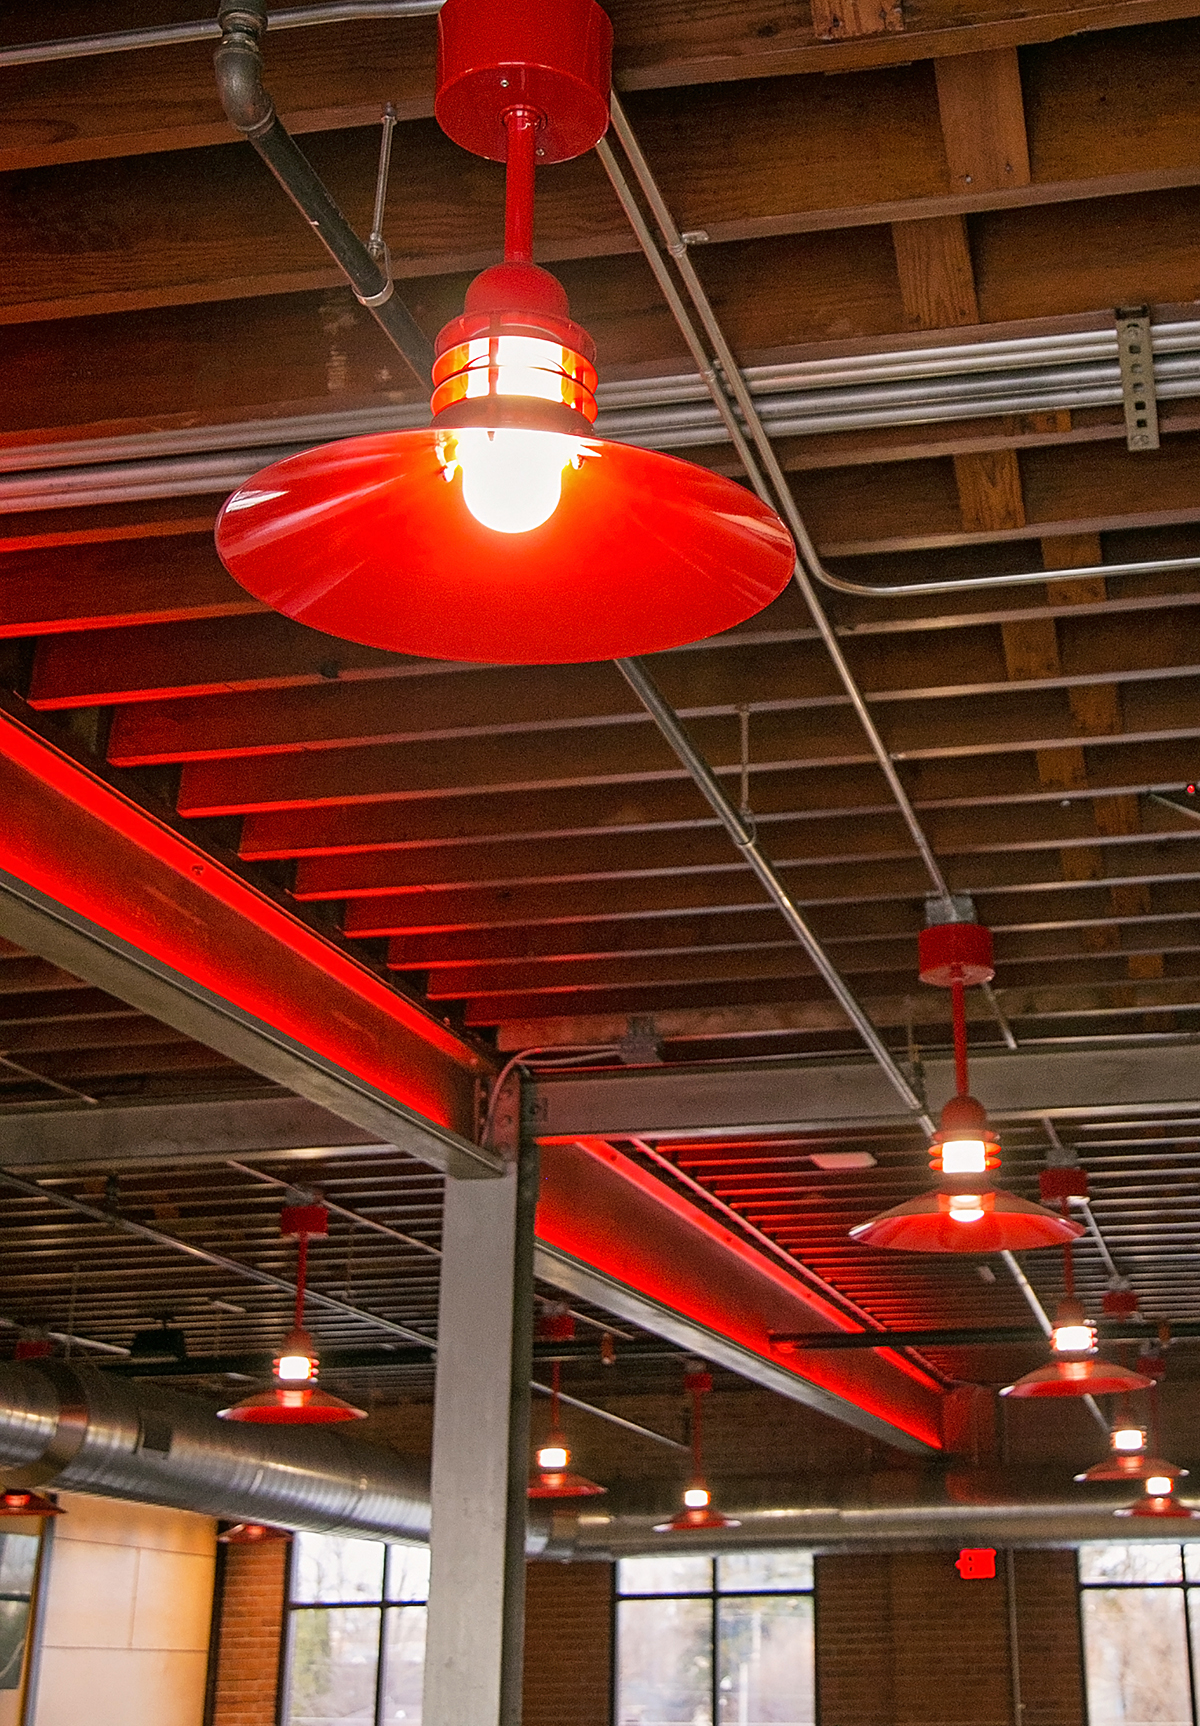 An industrial ceiling with red lamps hanging down at intervals